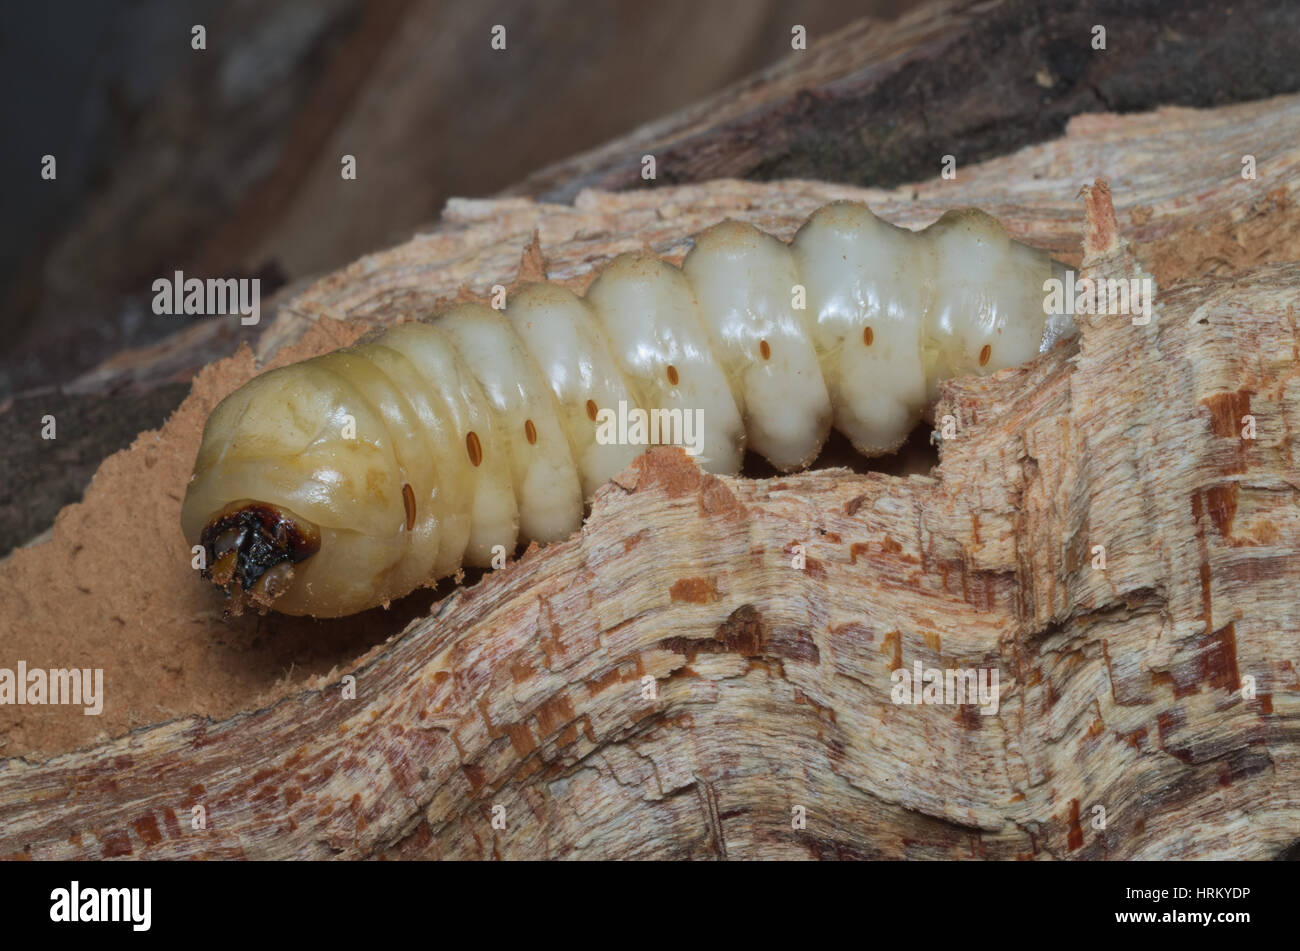 Advanced larval stage of a stag beetle (Lucanus cervus) growing inside dead wood of an old tree Stock Photo